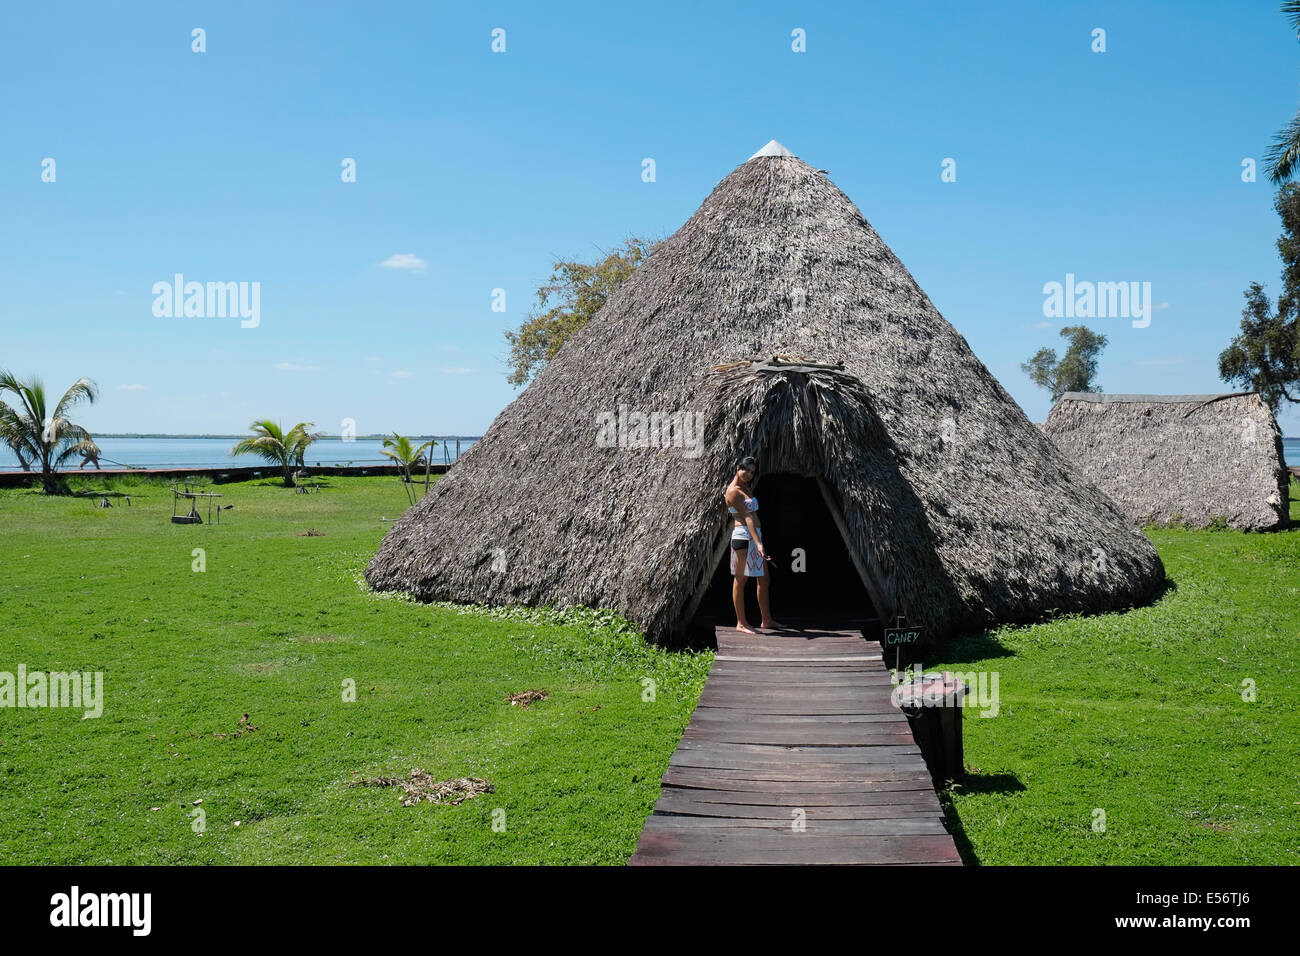 A reconstruction of a typical pre-Columbian Indian village at Guamá on the Zapata swamp, Cuba. Stock Photo